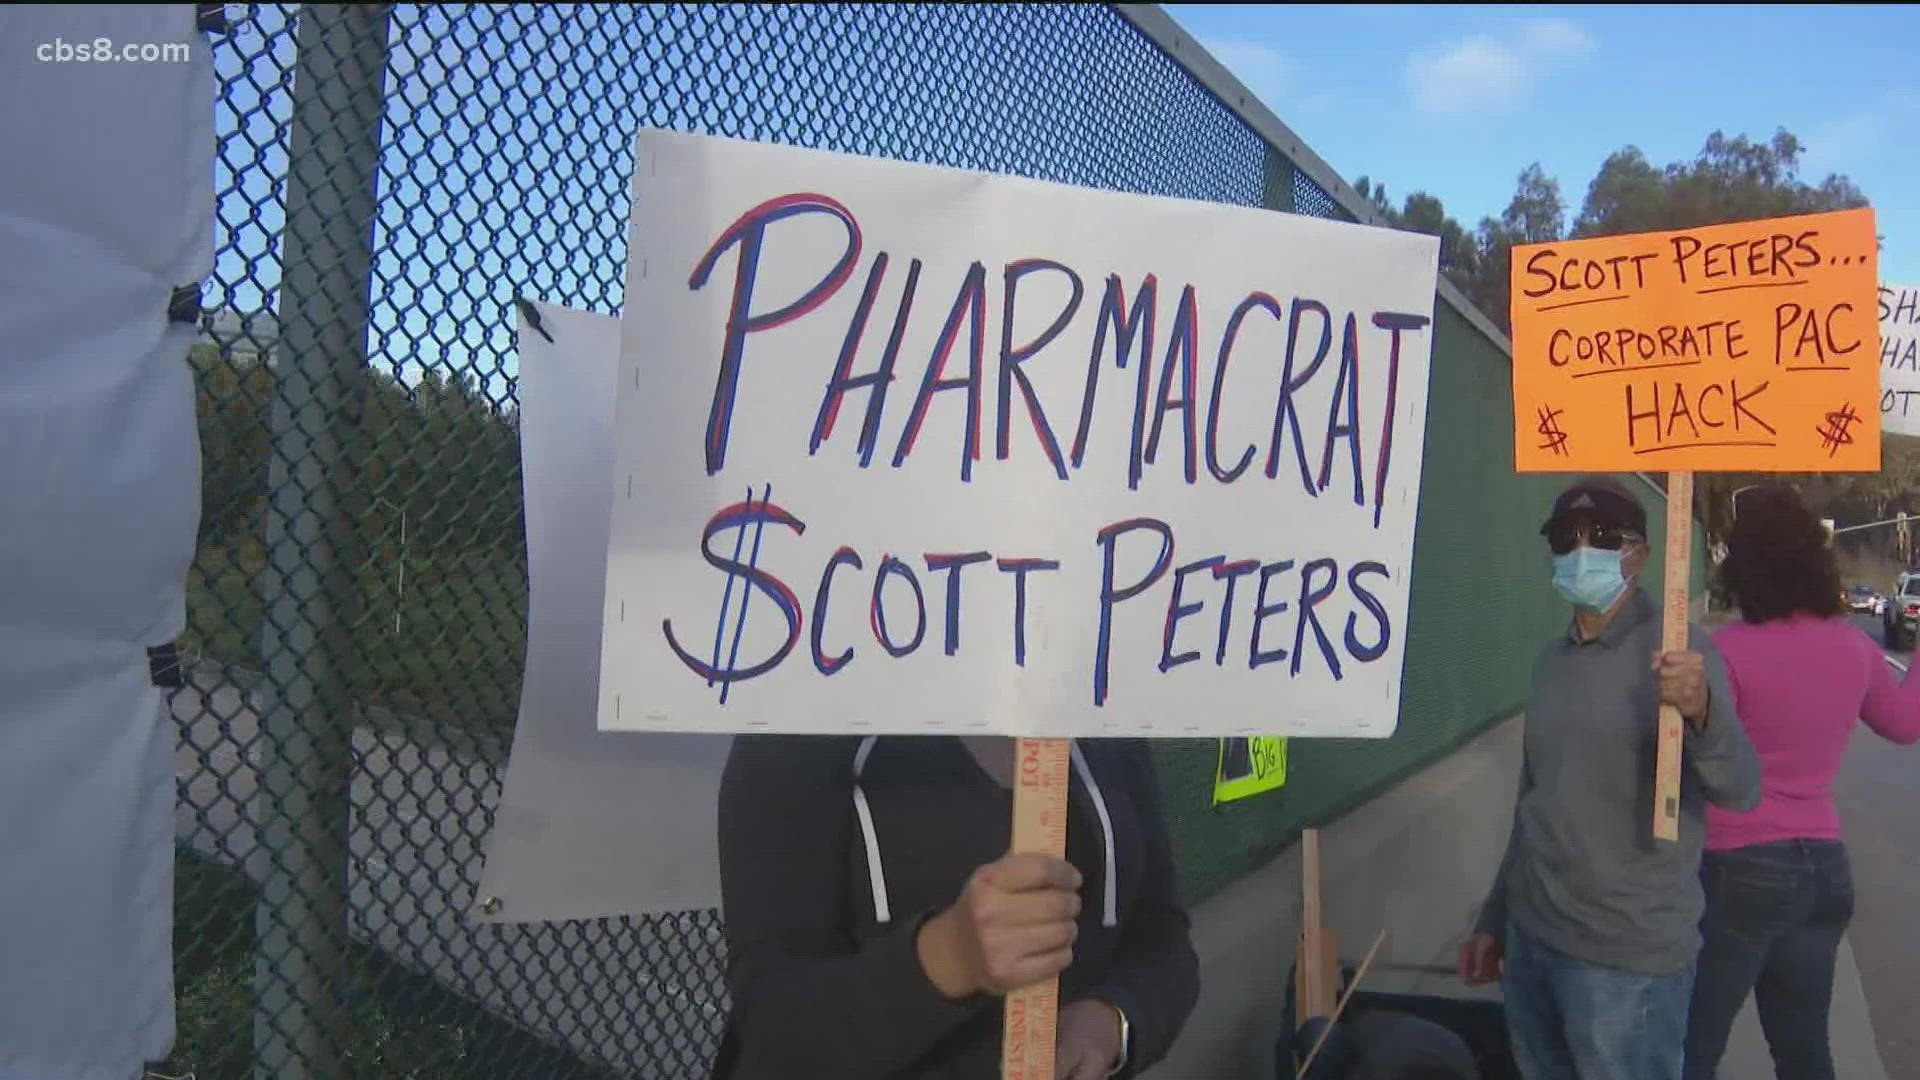 Peters has insisted that he is being "misrepresented" and has come up with an alternate plan to lower prescription costs of his own.